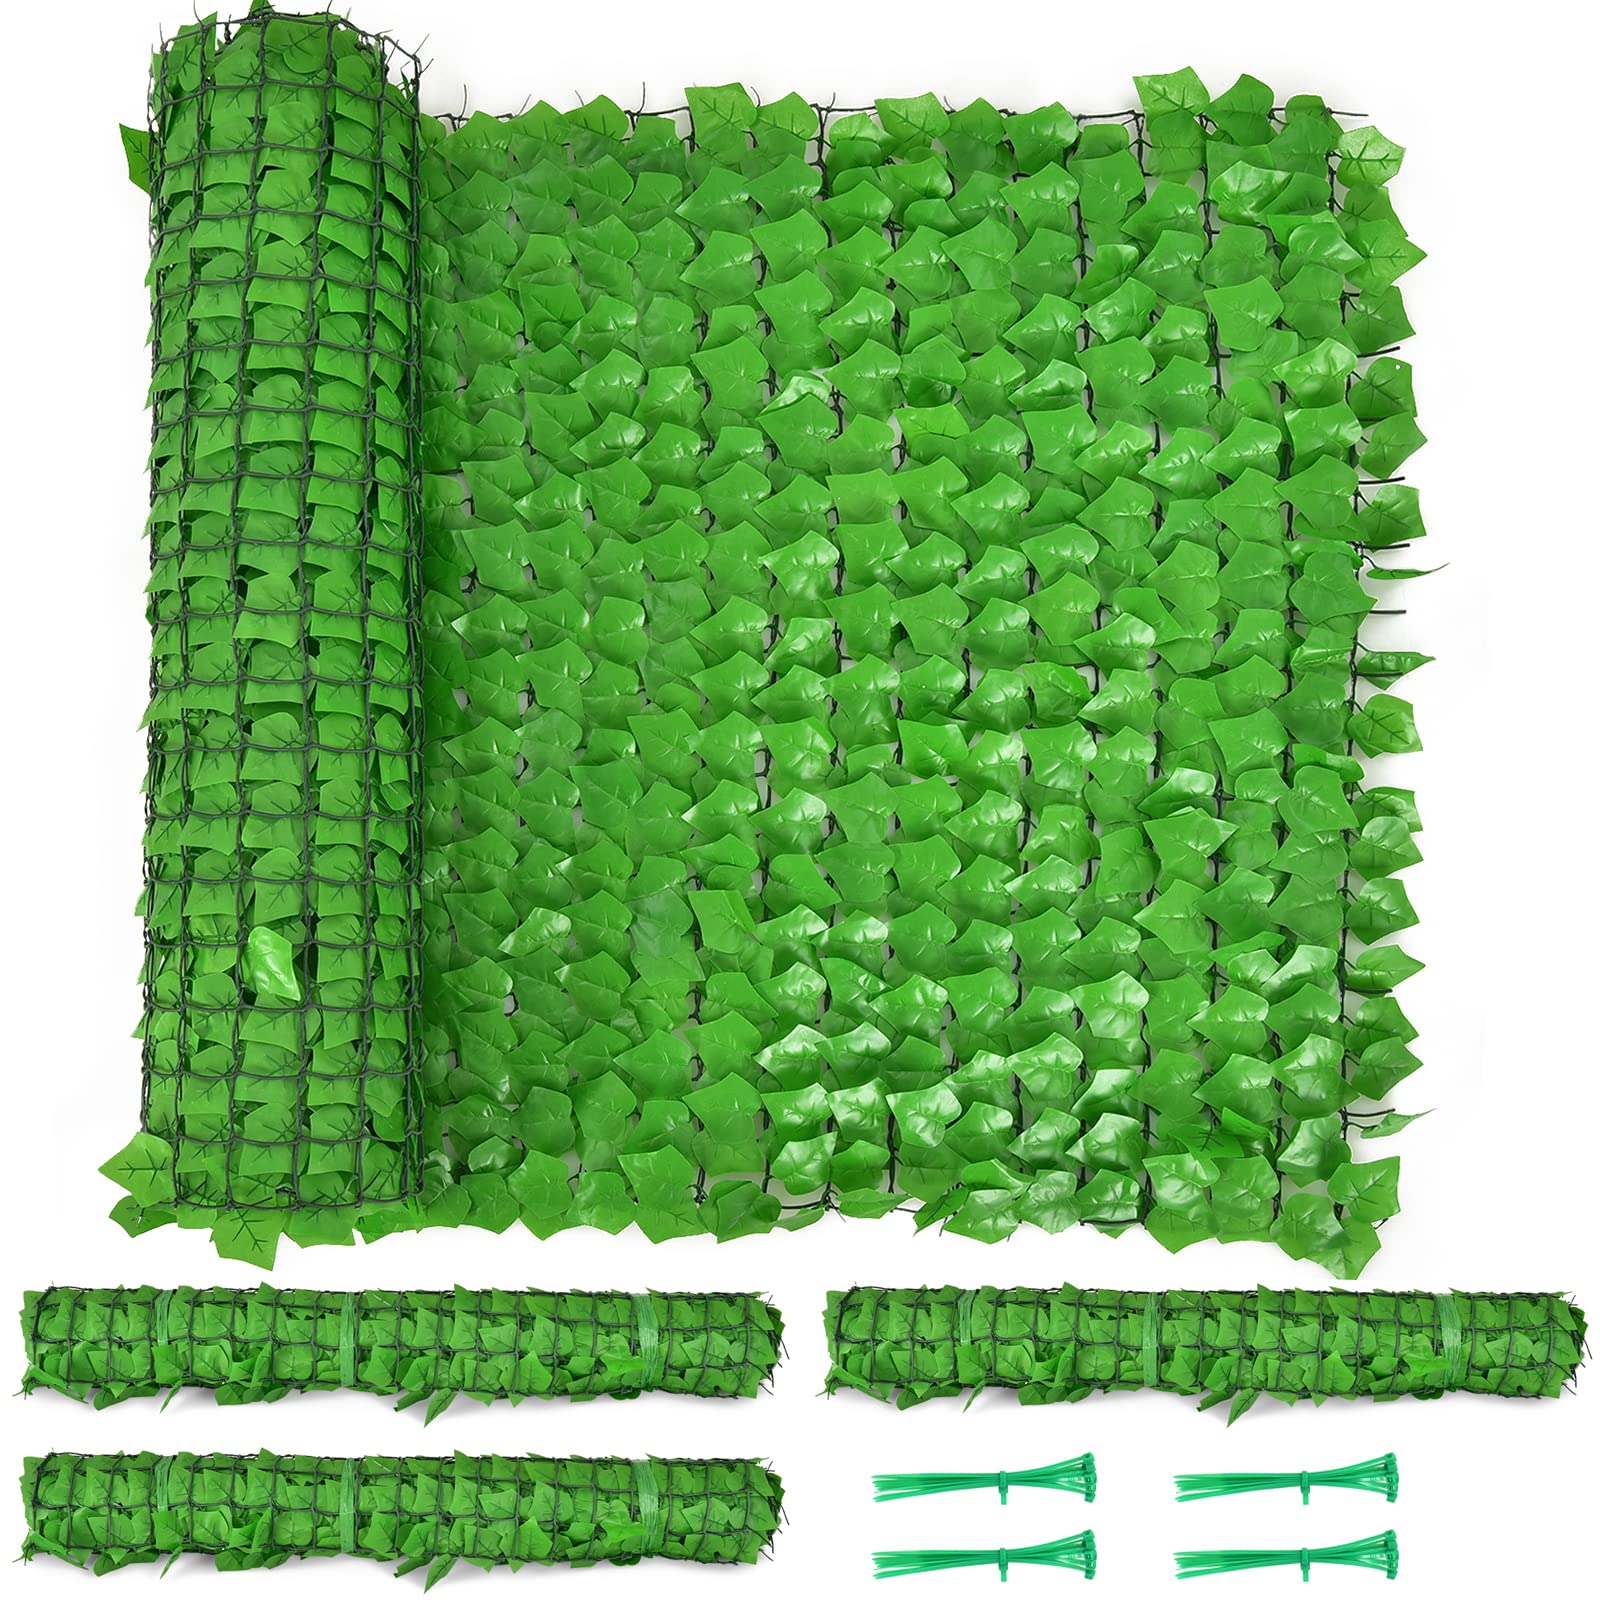 Giantex 118" x 39.4" Artificial Hedges Fence Faux Ivy Vine Greenery Wall